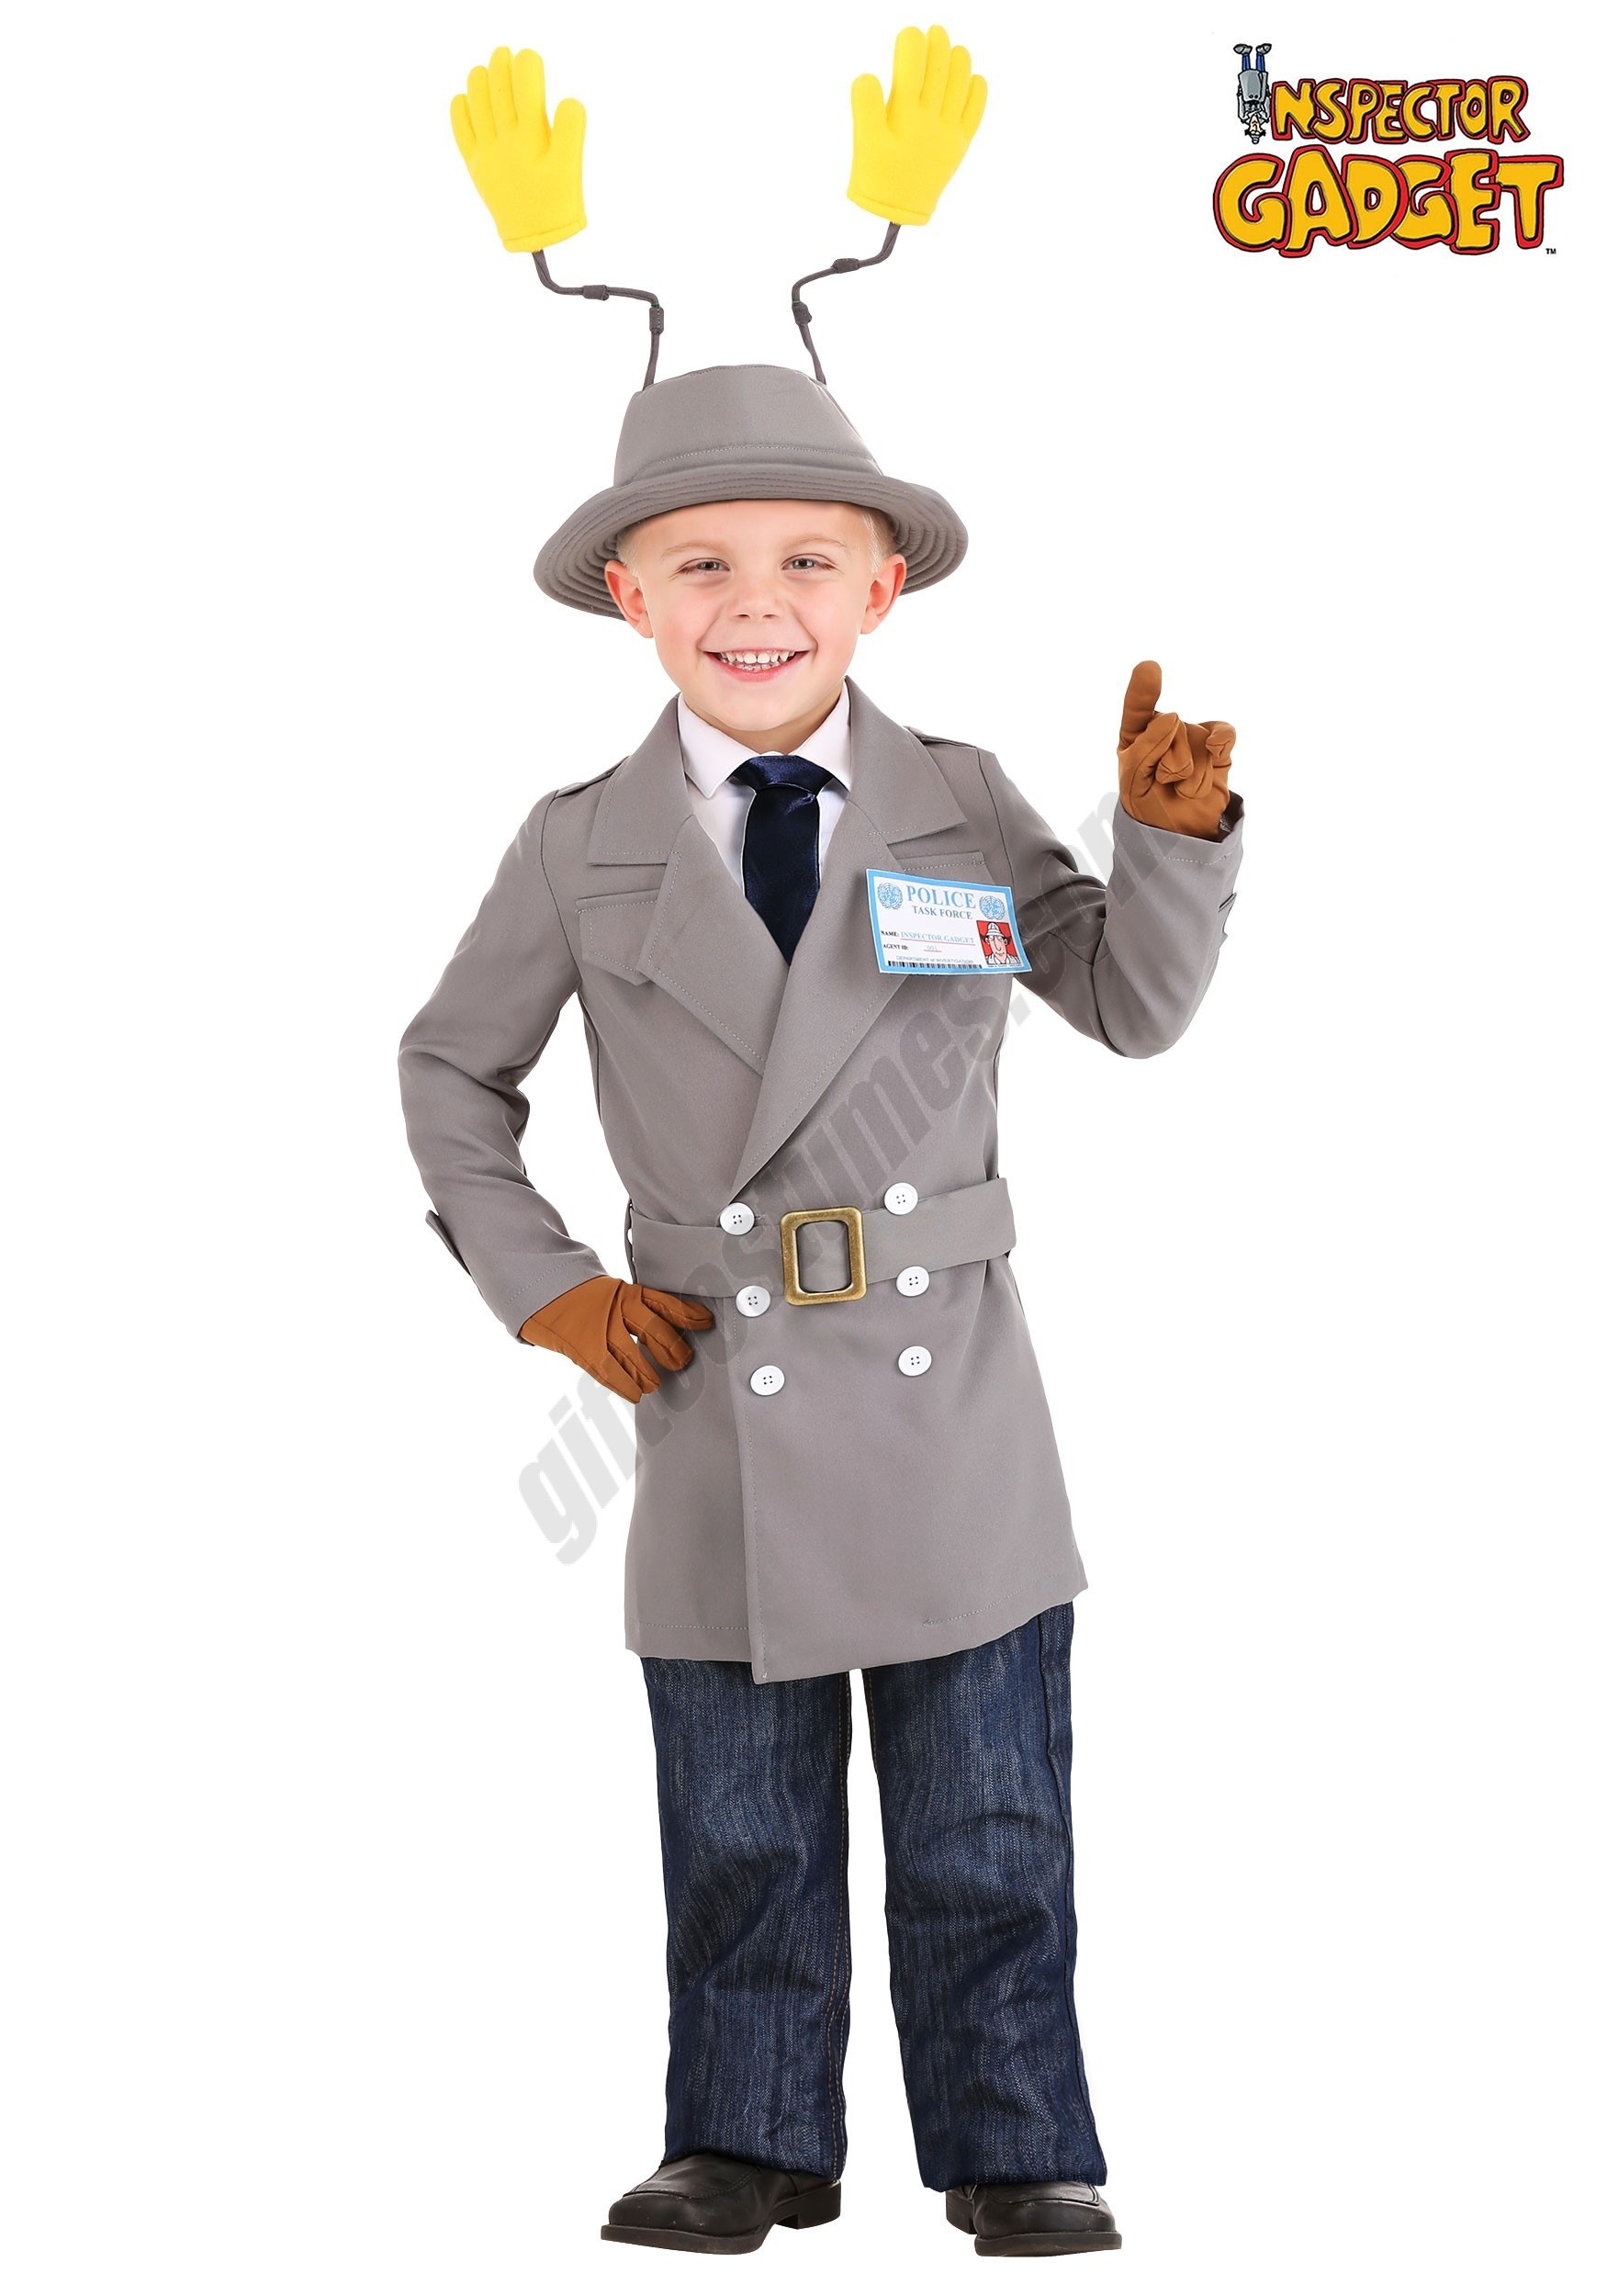 Inspector Gadget Costume for Toddlers Promotions - Inspector Gadget Costume for Toddlers Promotions